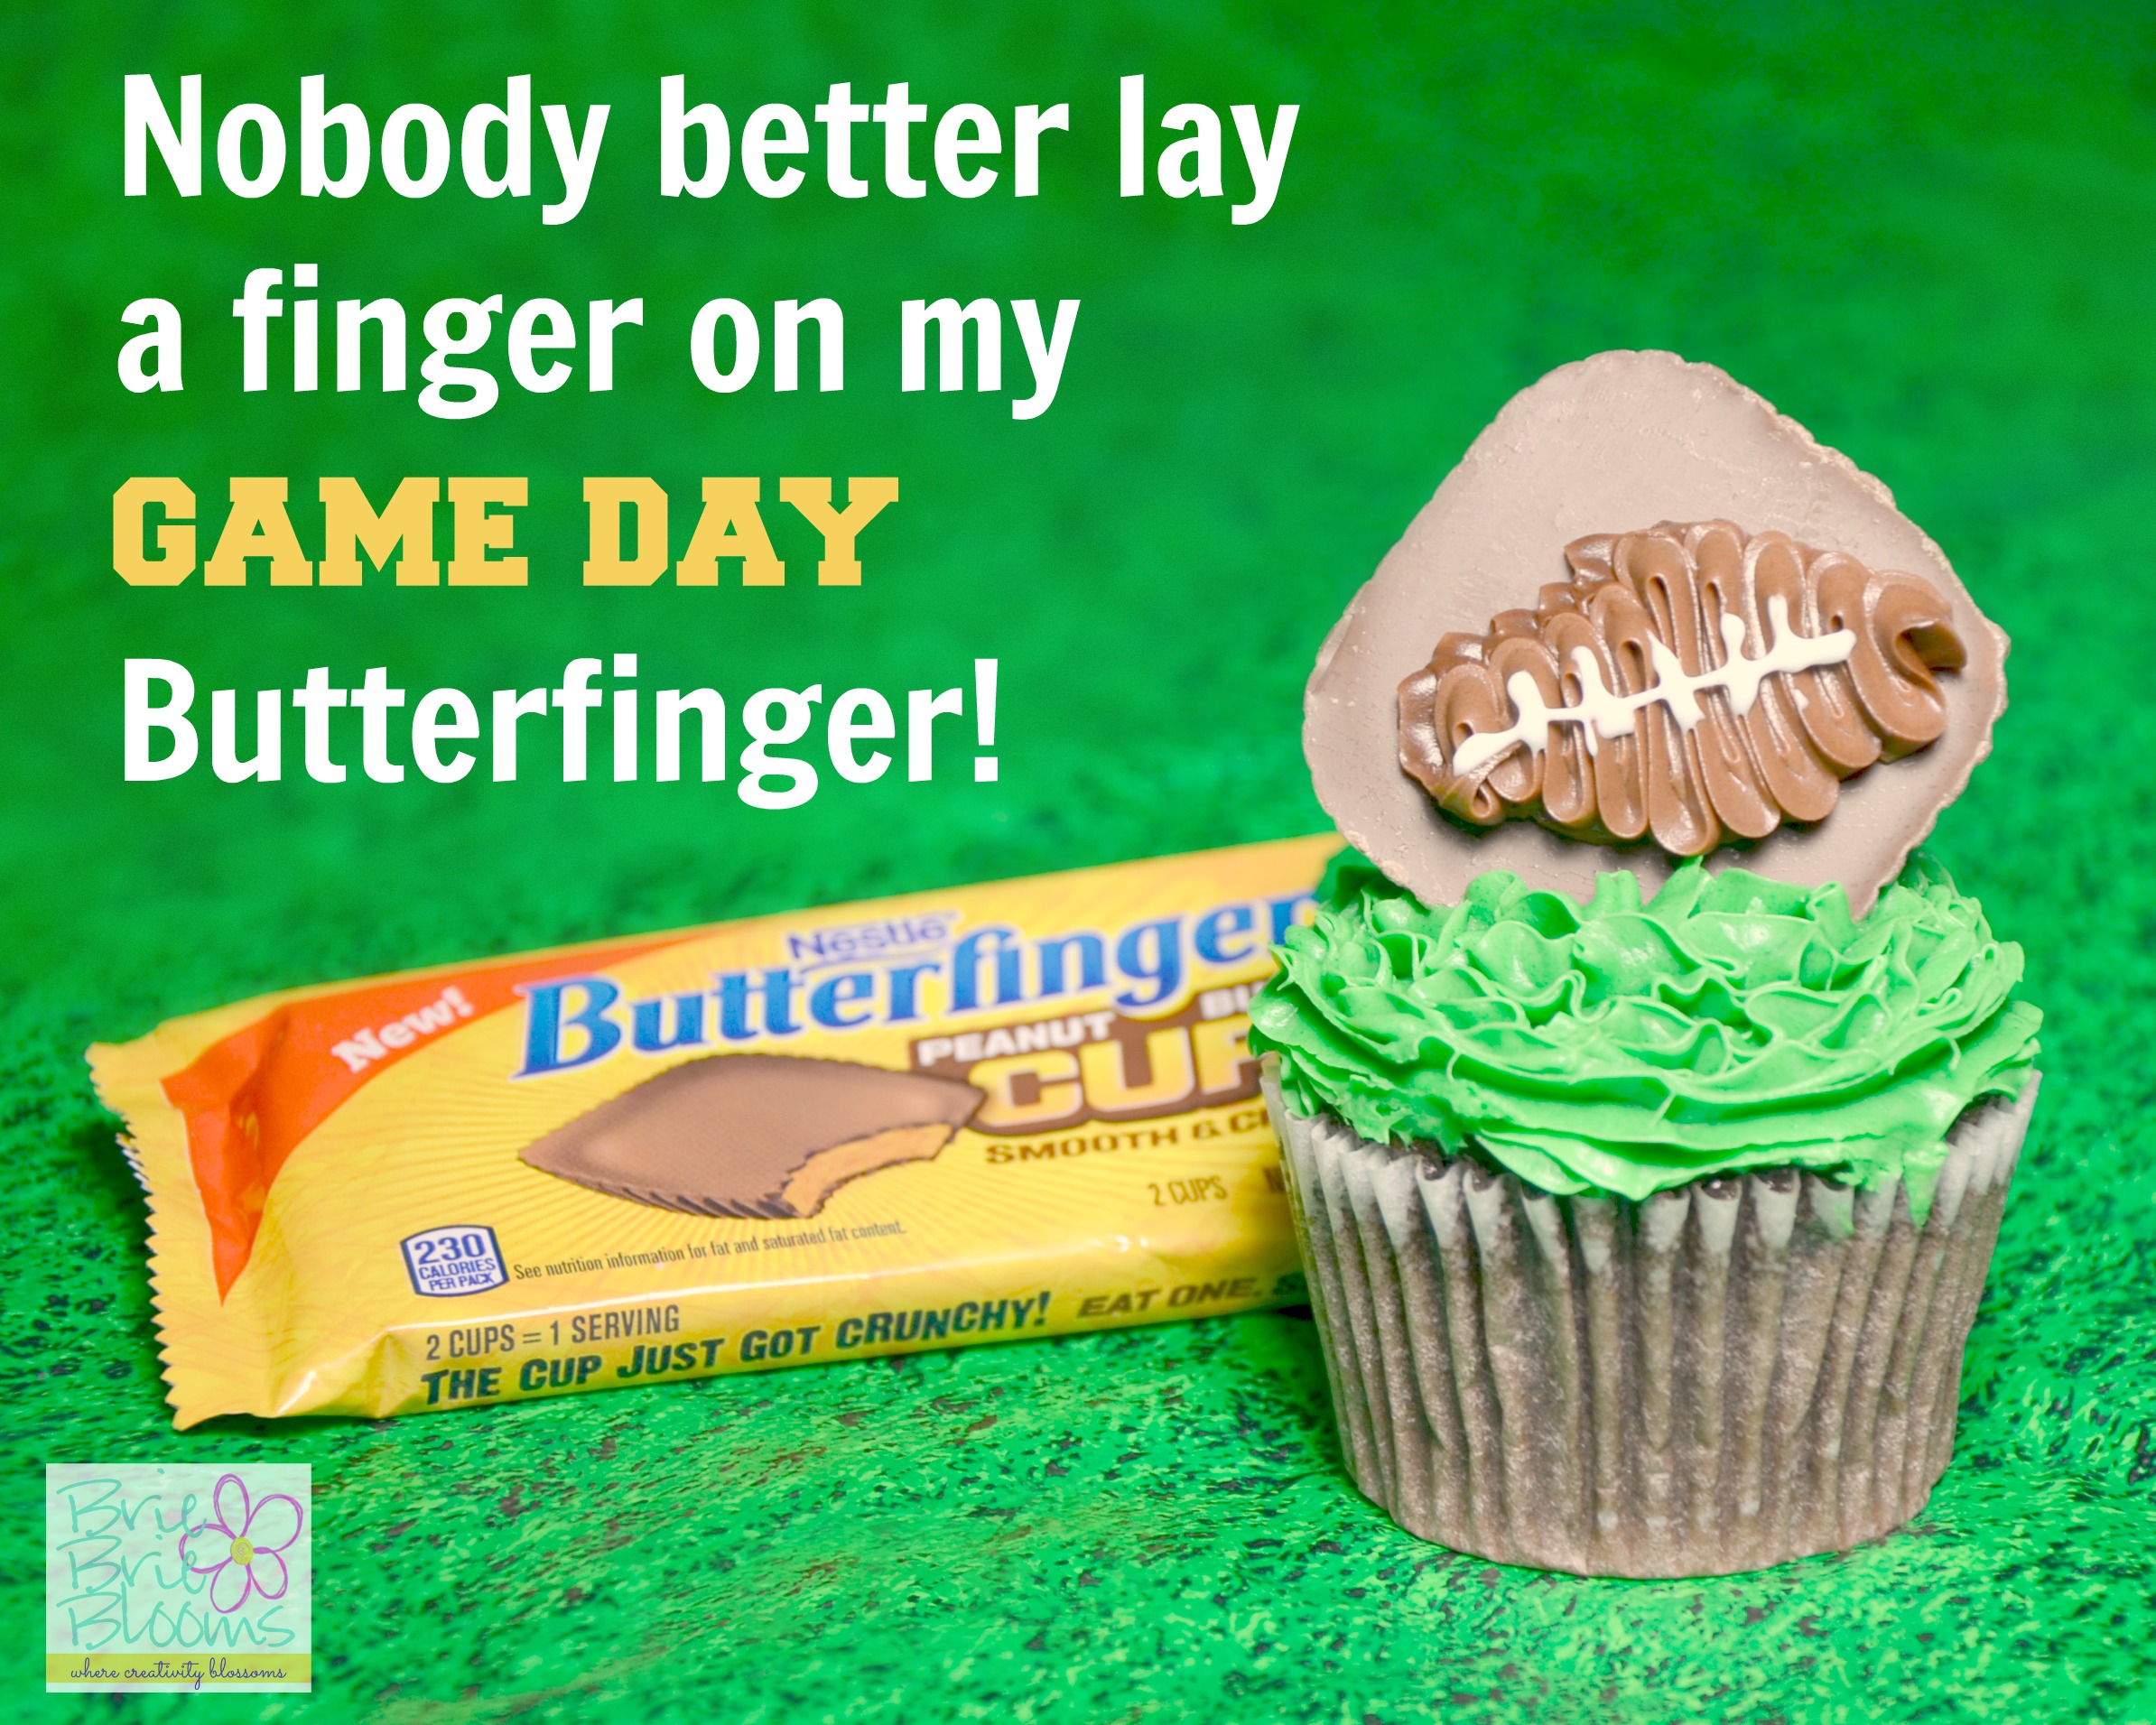 Nobody better lay a finger on my game day Butterfinger! #thatnewcrush #shop #cbias